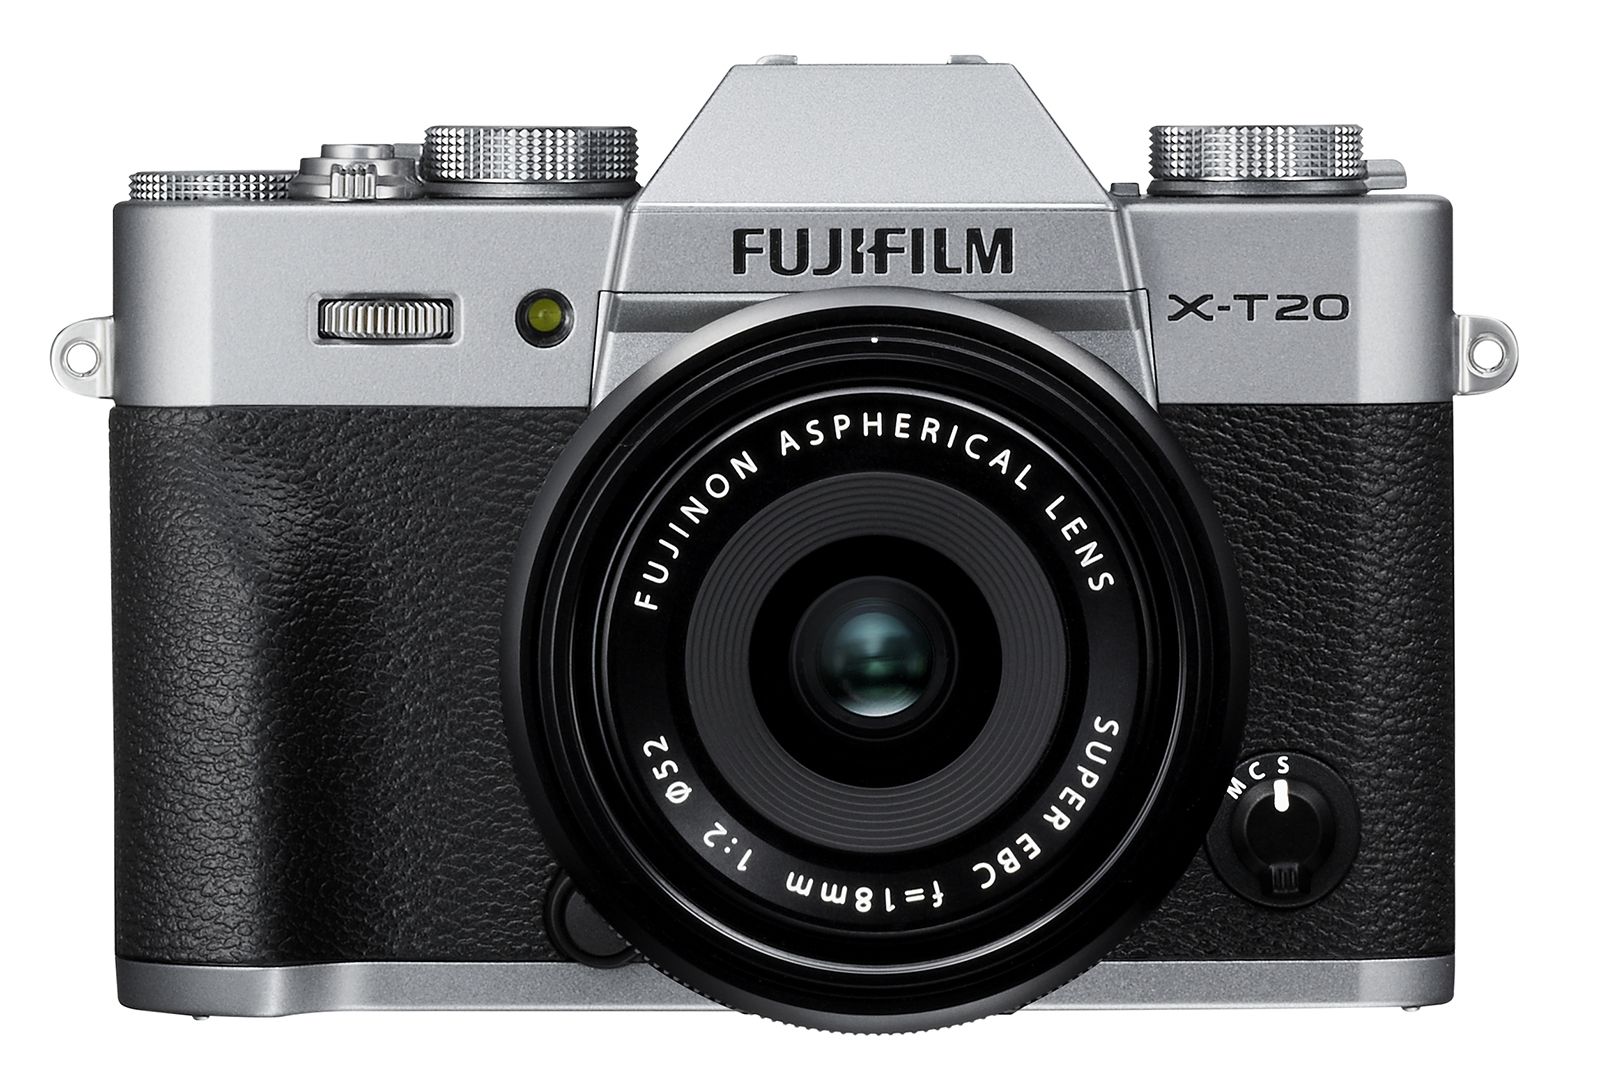 fujifilm x t20 ups resolution adds touchscreen to mid level system camera image 1